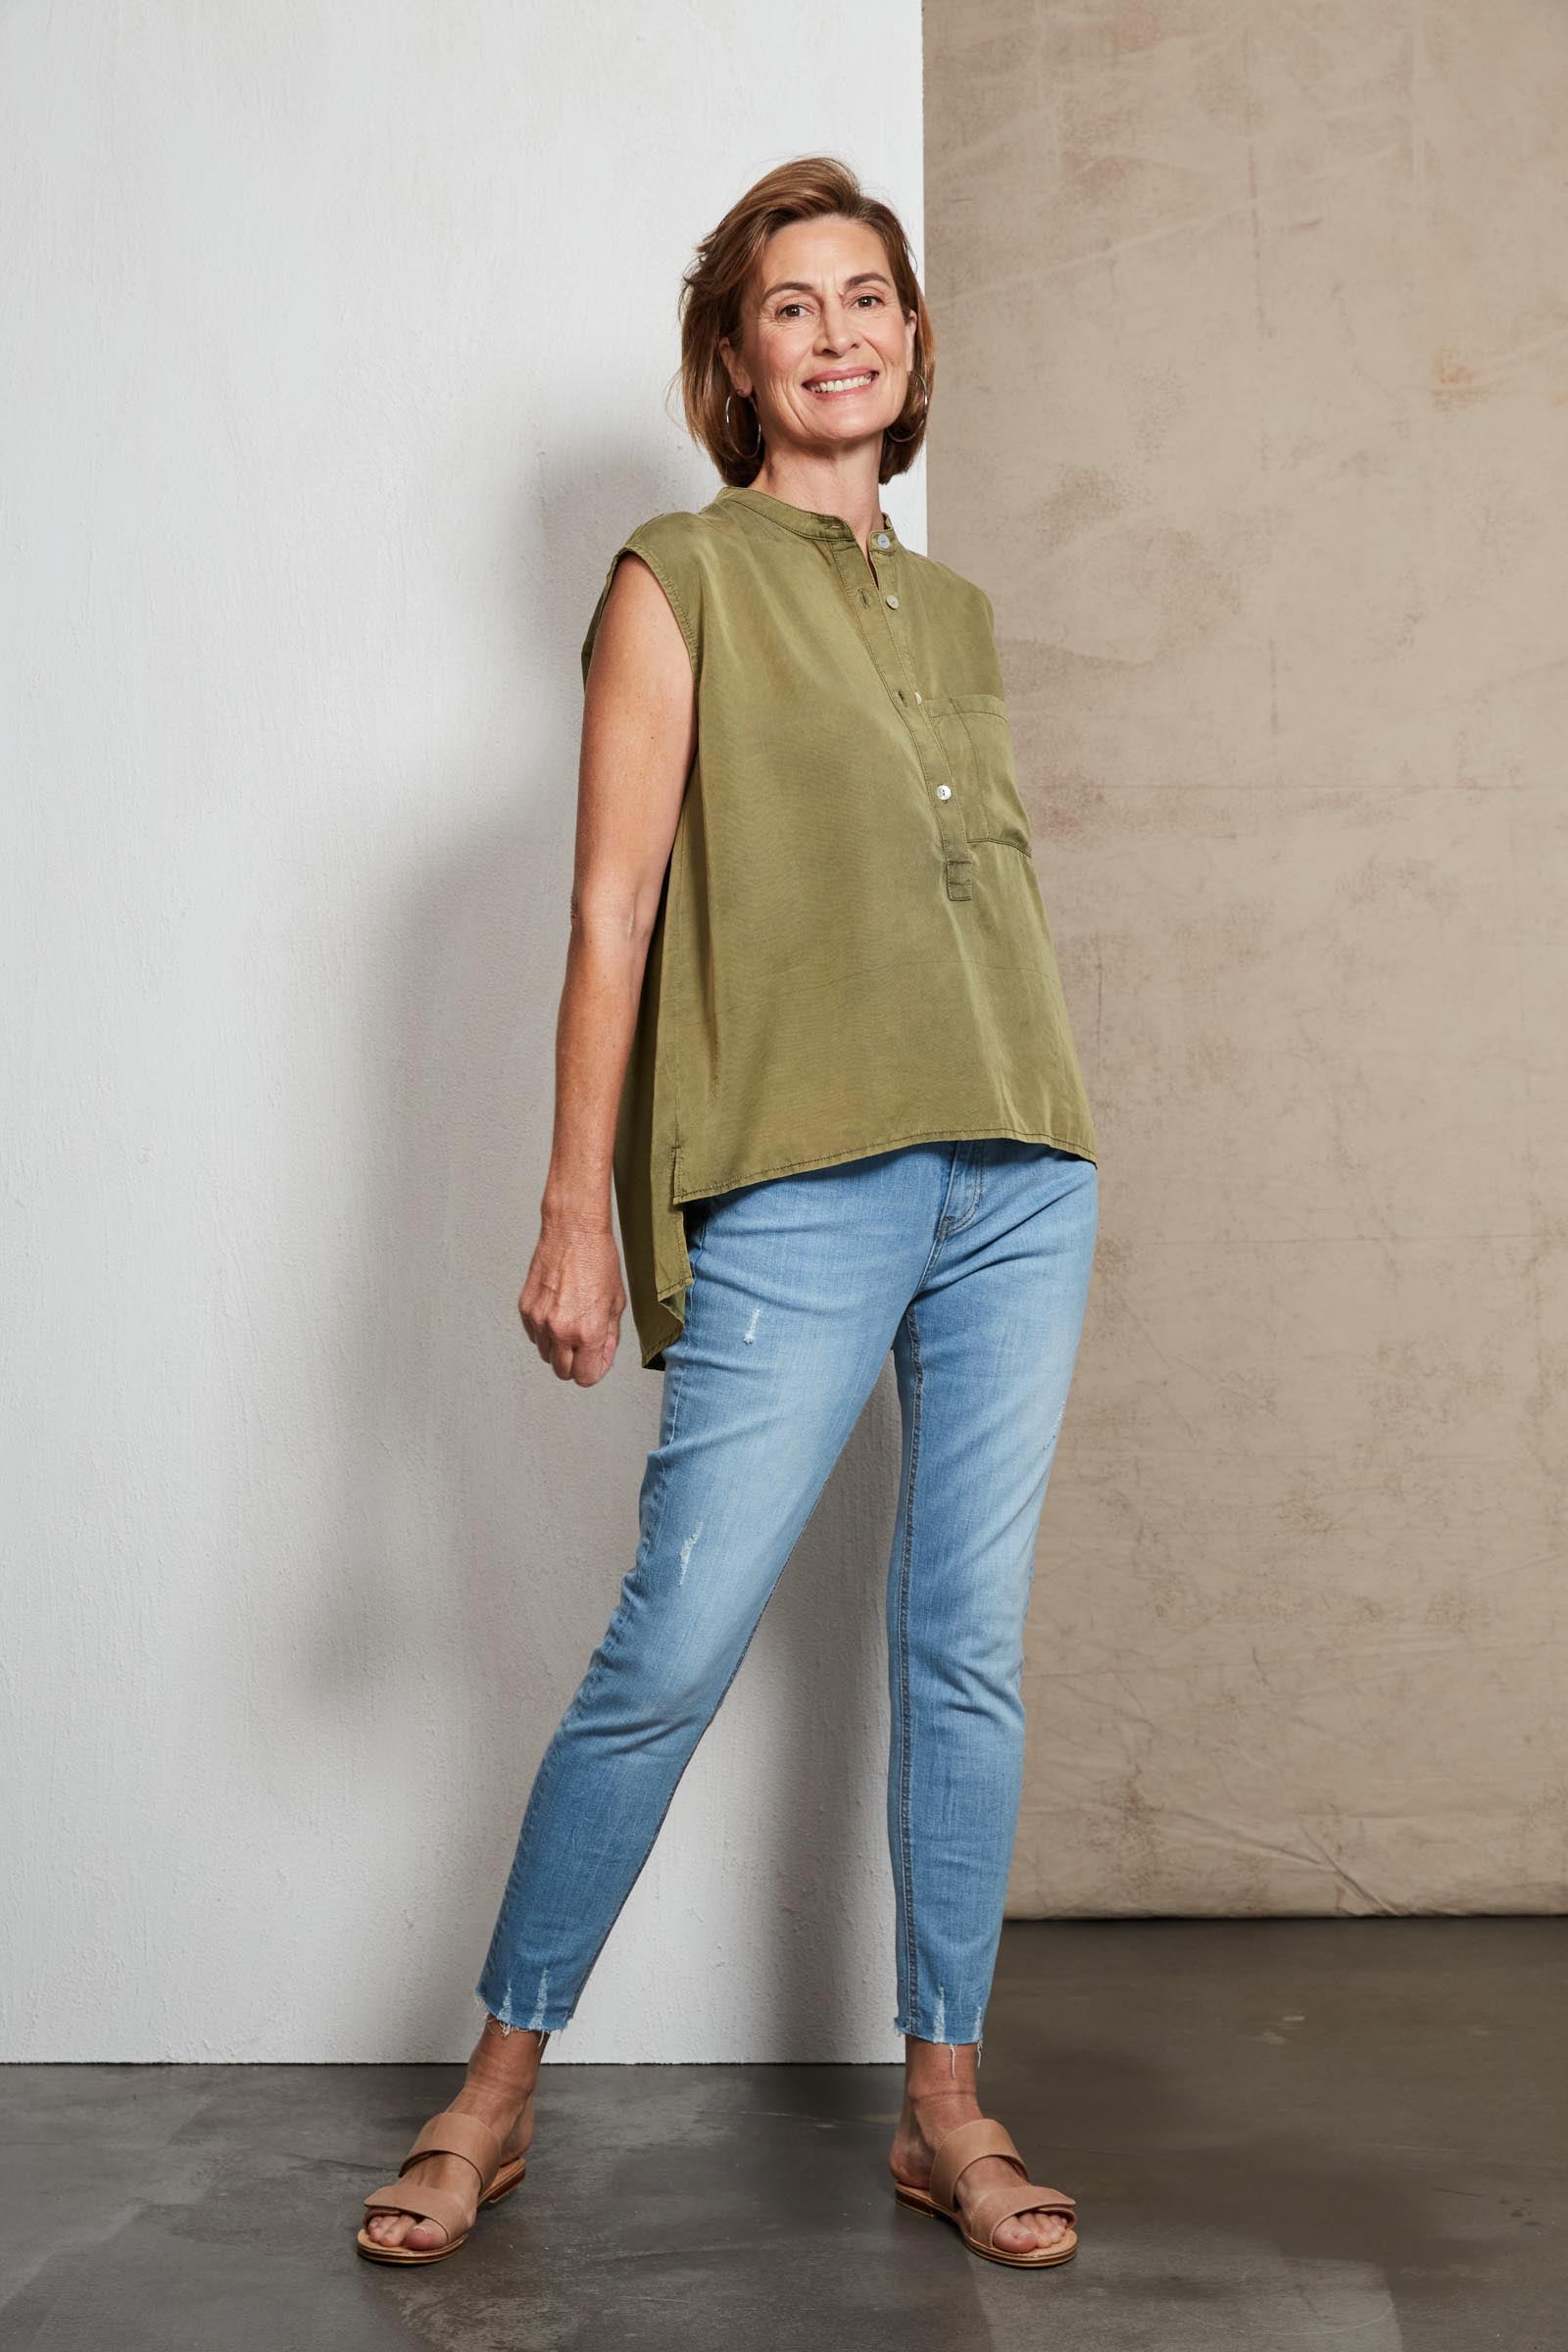 Amity Top - Moss - eb&ive Clothing - Top Sleeveless